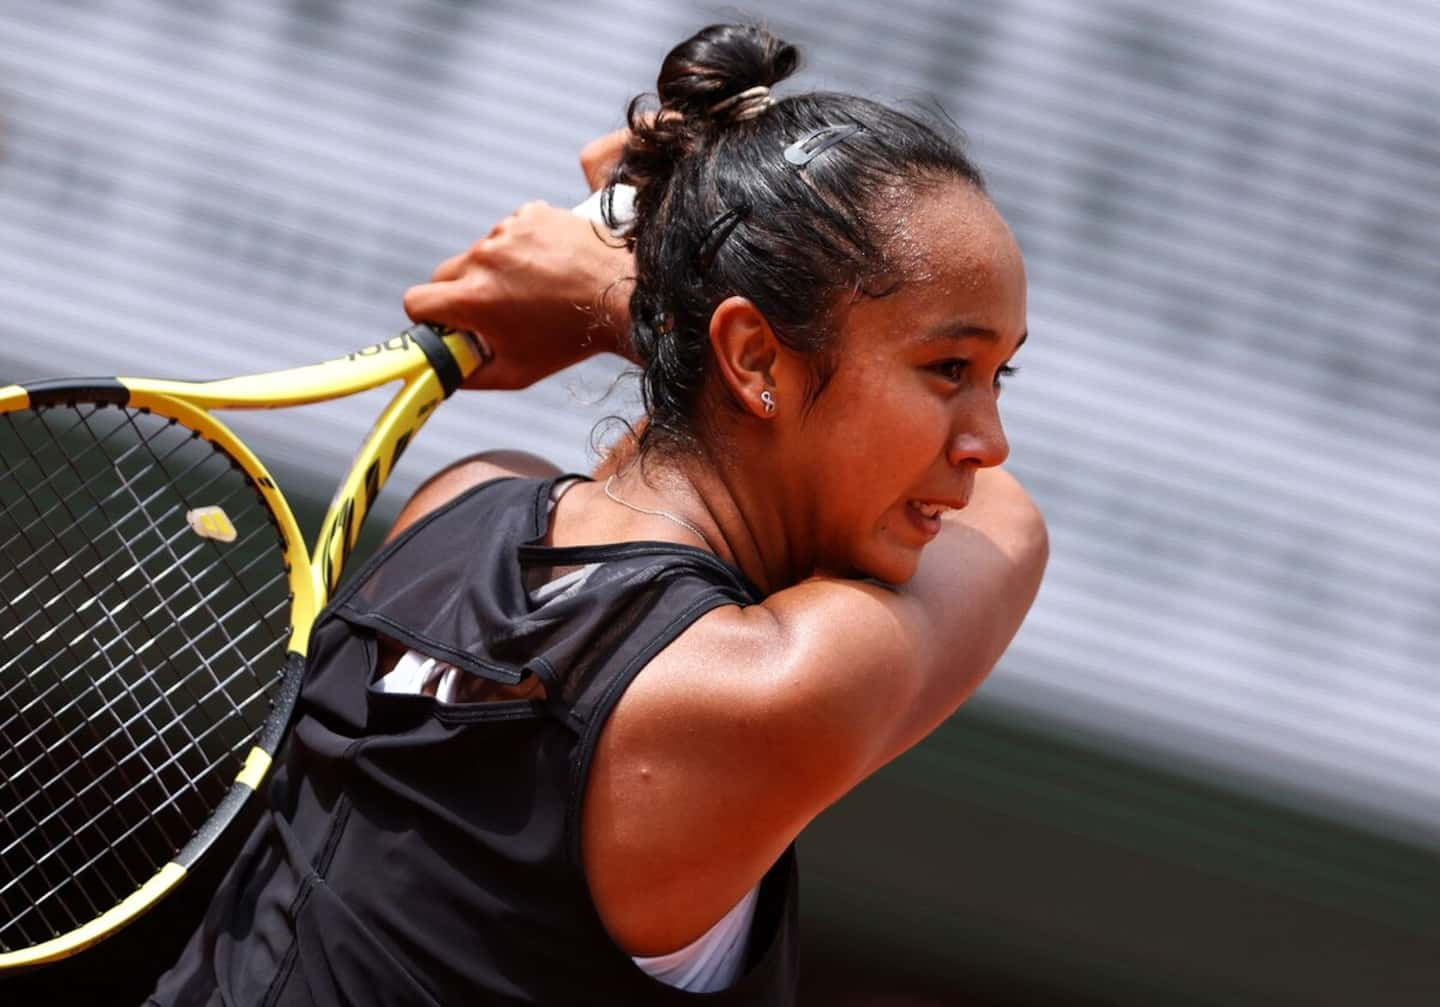 French tennis internationals: Leylah Fernandez's chances on the rise